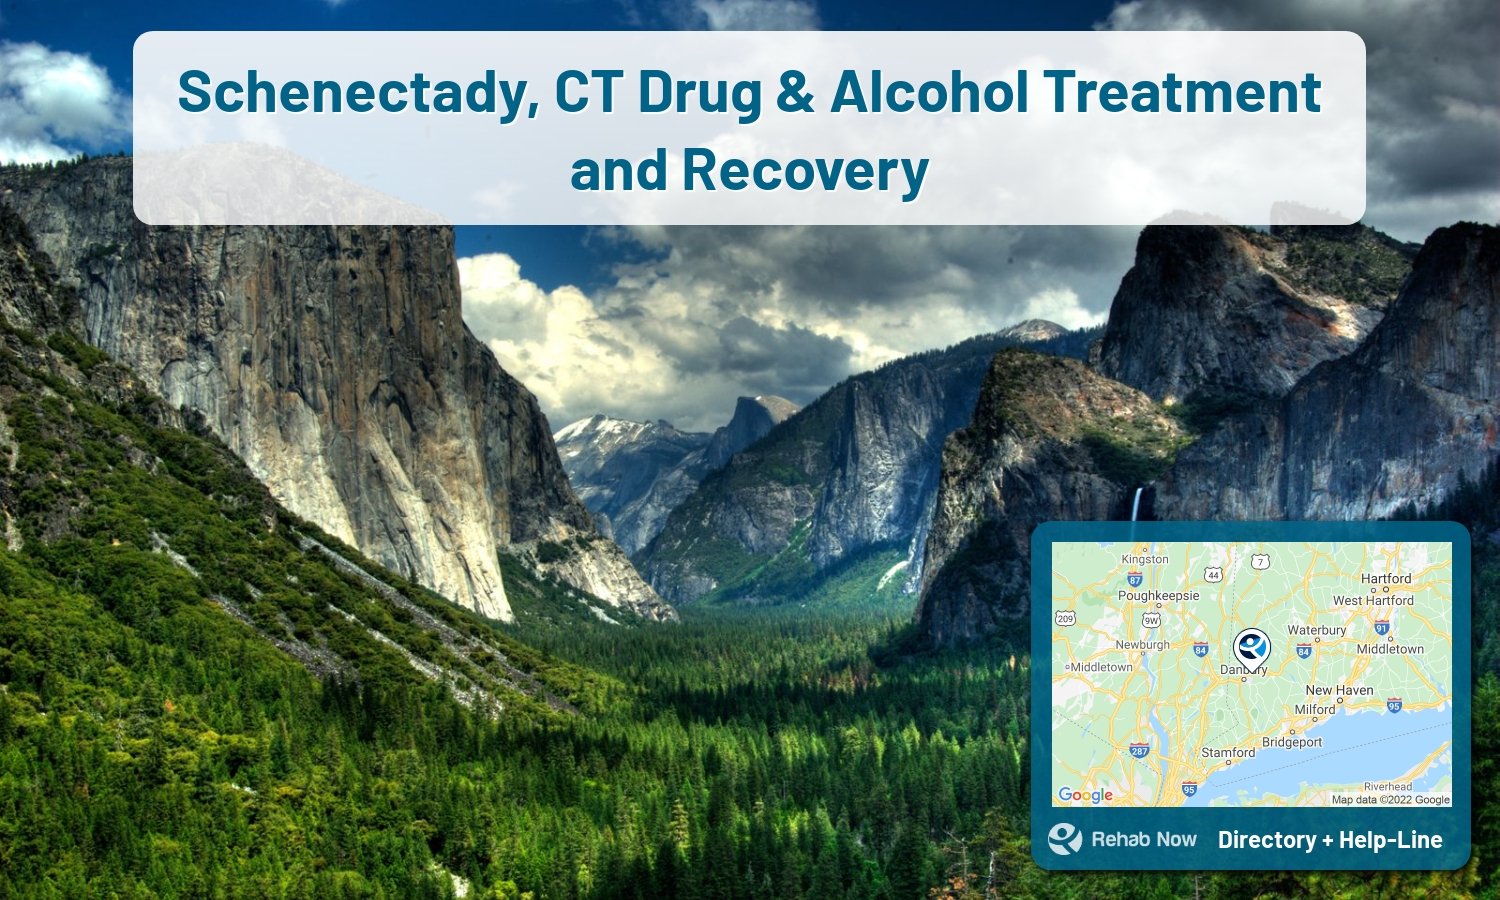 Schenectady, CT Treatment Centers. Find drug rehab in Schenectady, Connecticut, or detox and treatment programs. Get the right help now!